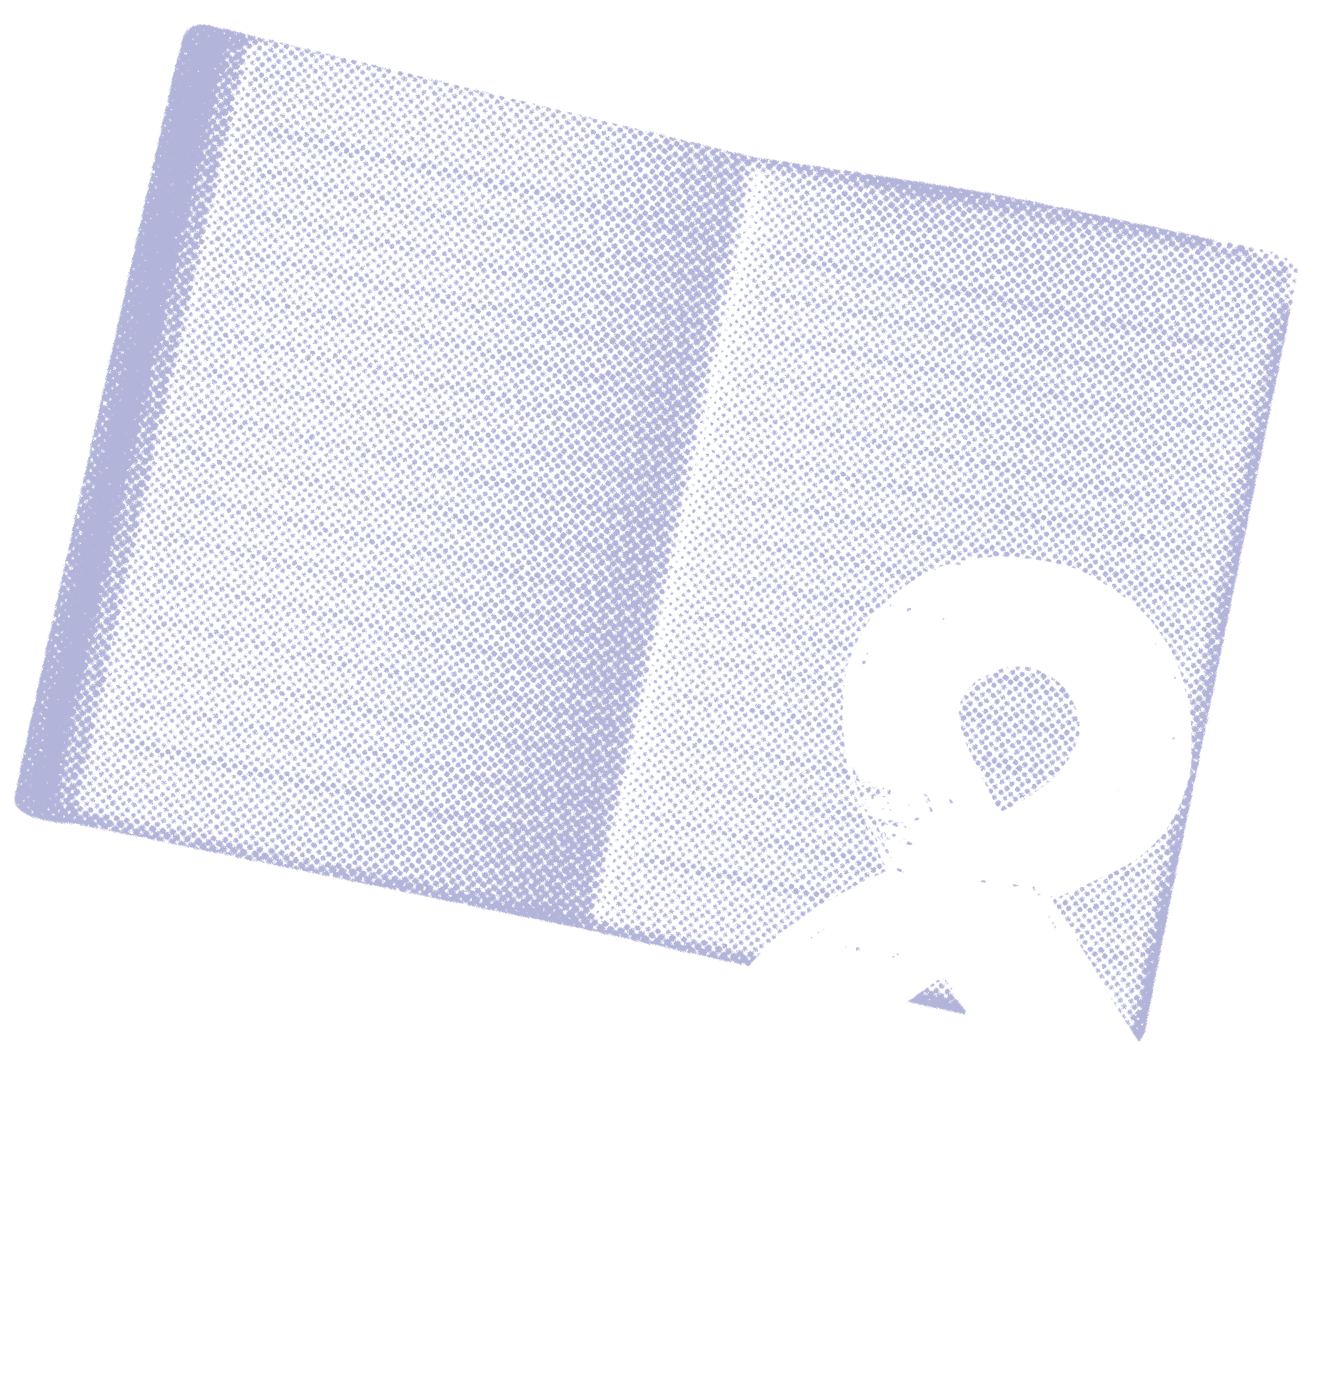 Book and ampersand